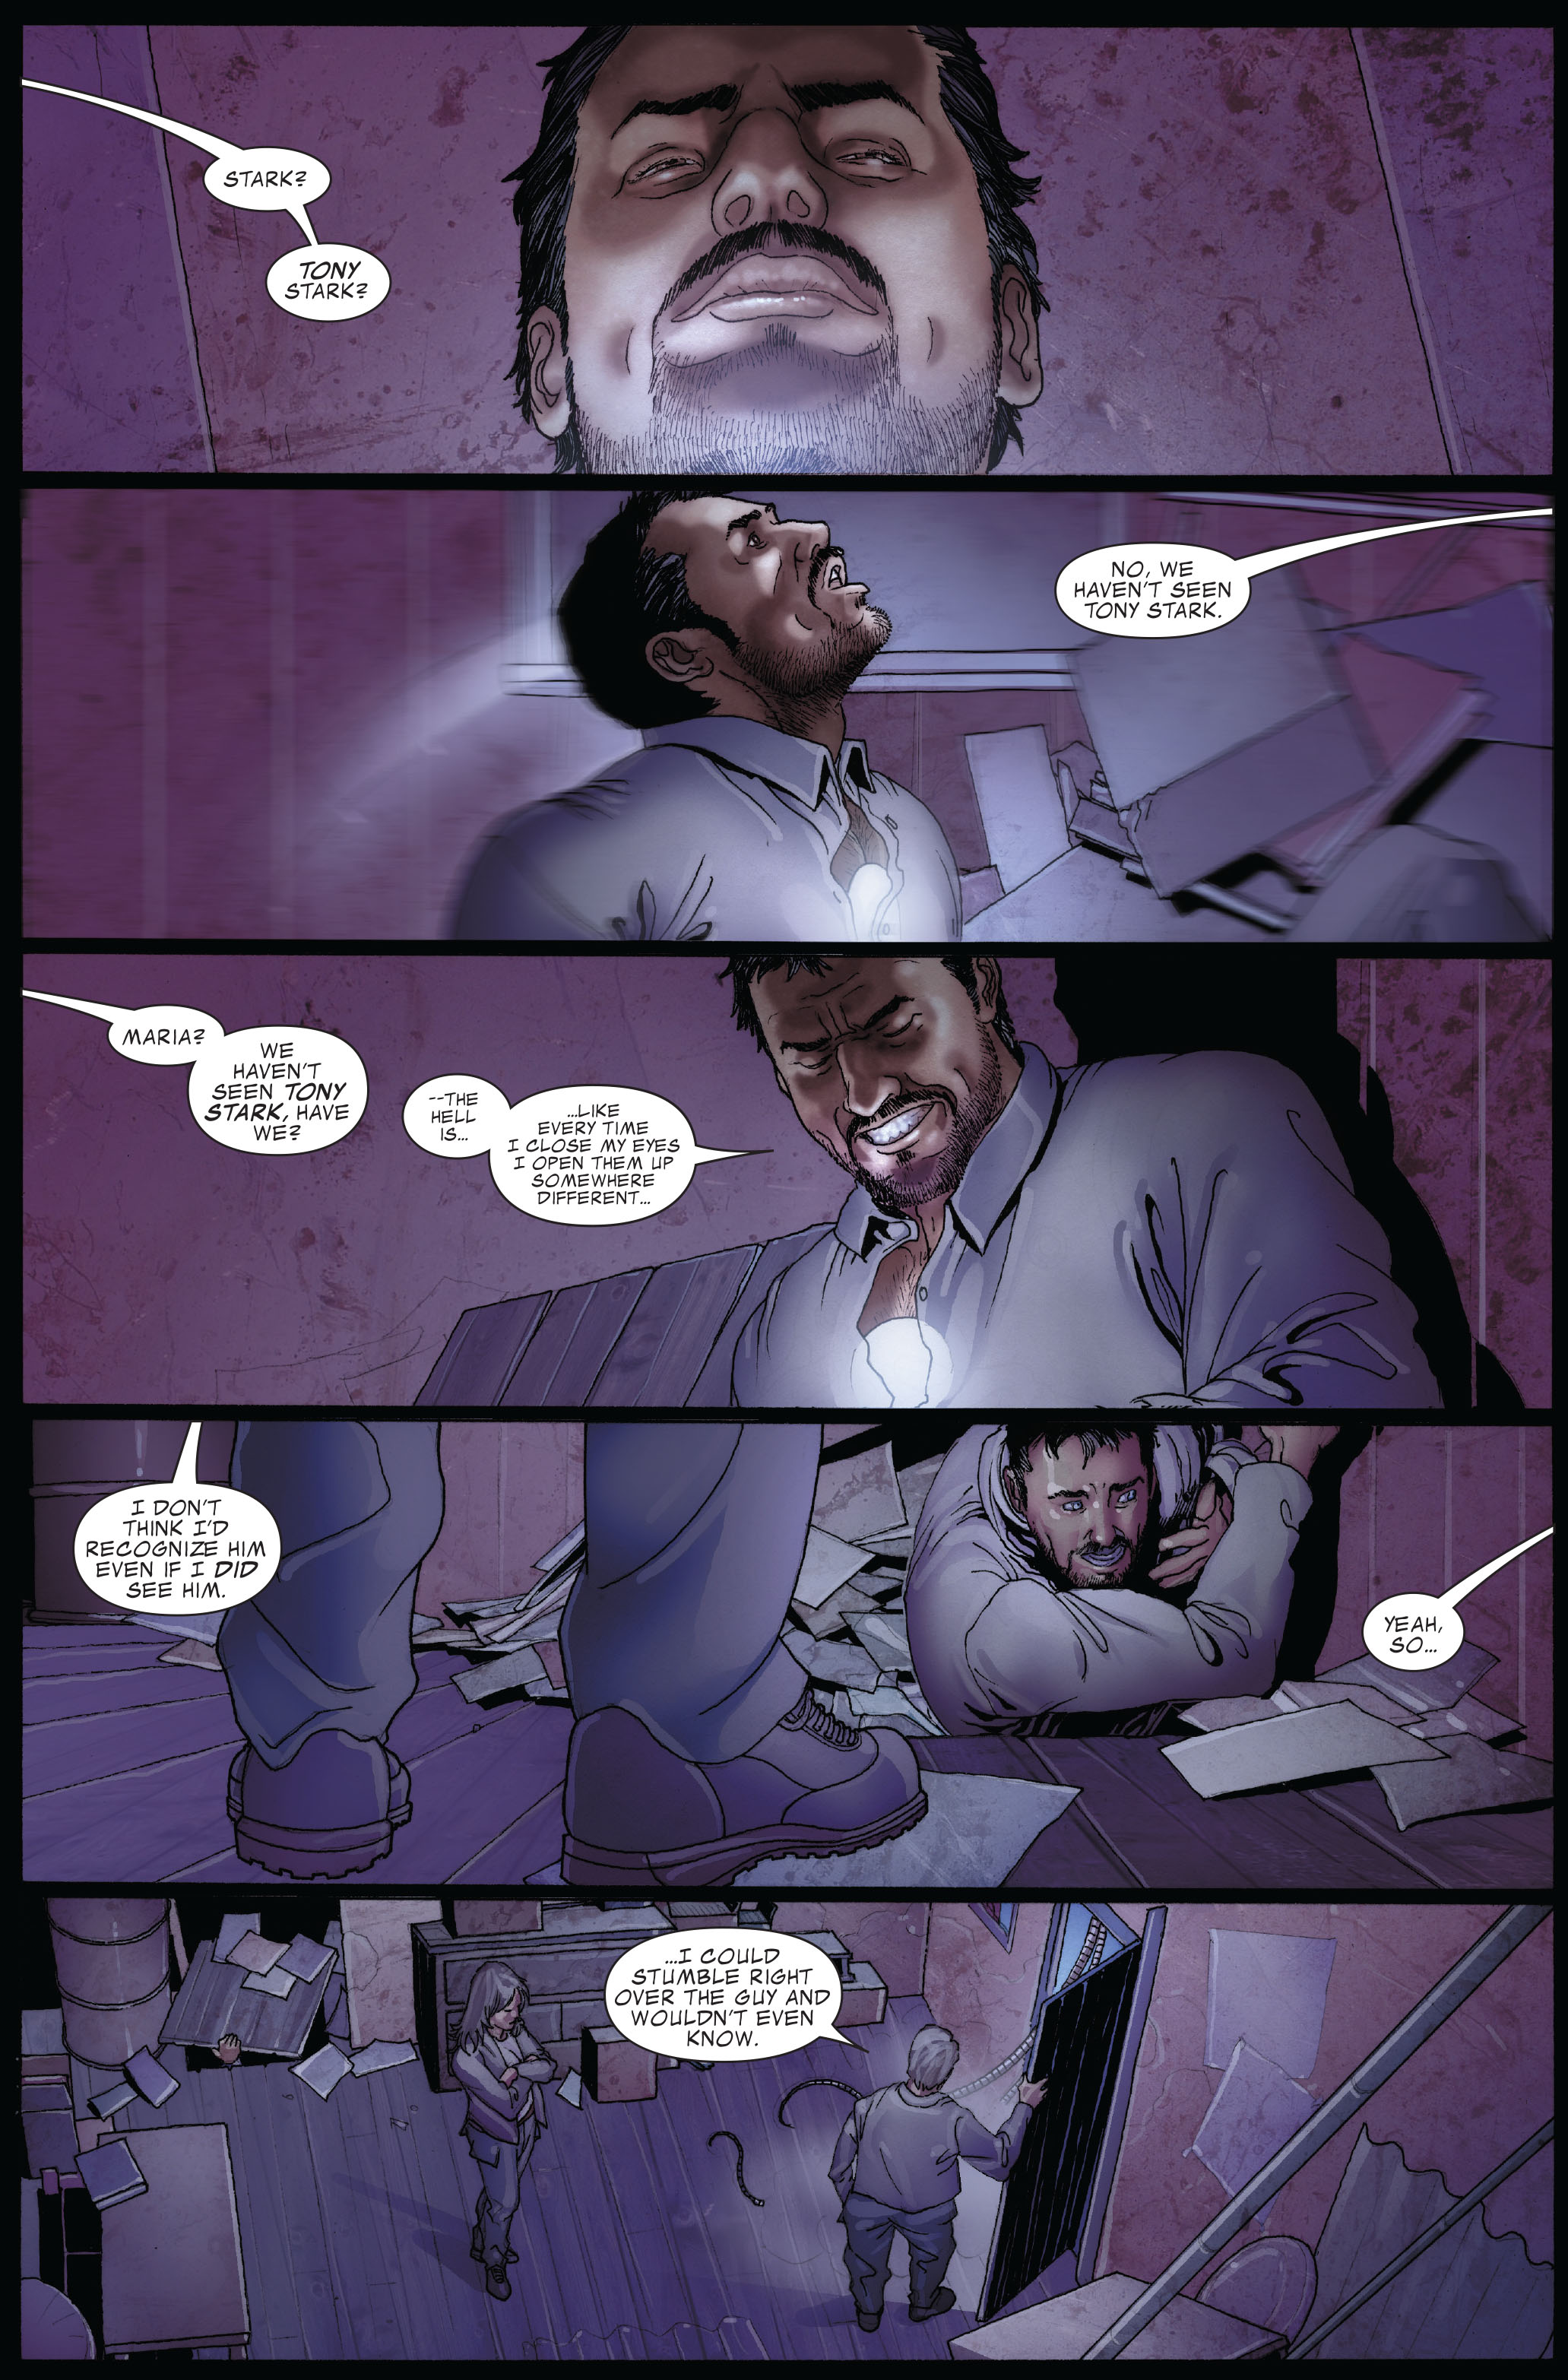 Invincible Iron Man (2008) 22 Page 4